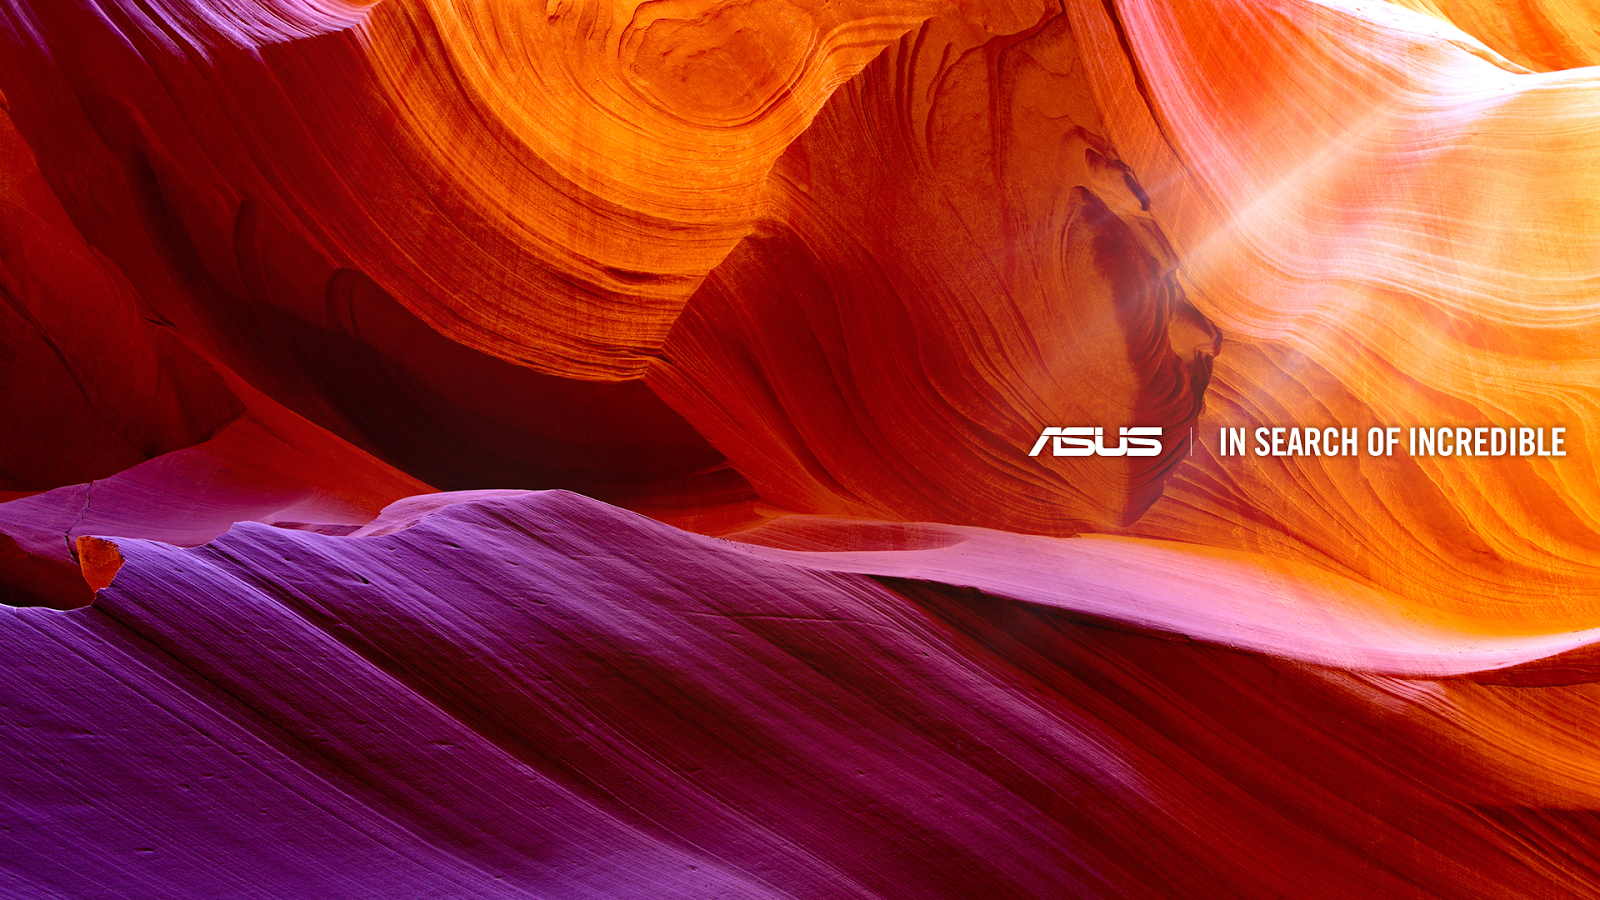 REQUEST Could Someone Share This Asus Wallpaper NotebookReview